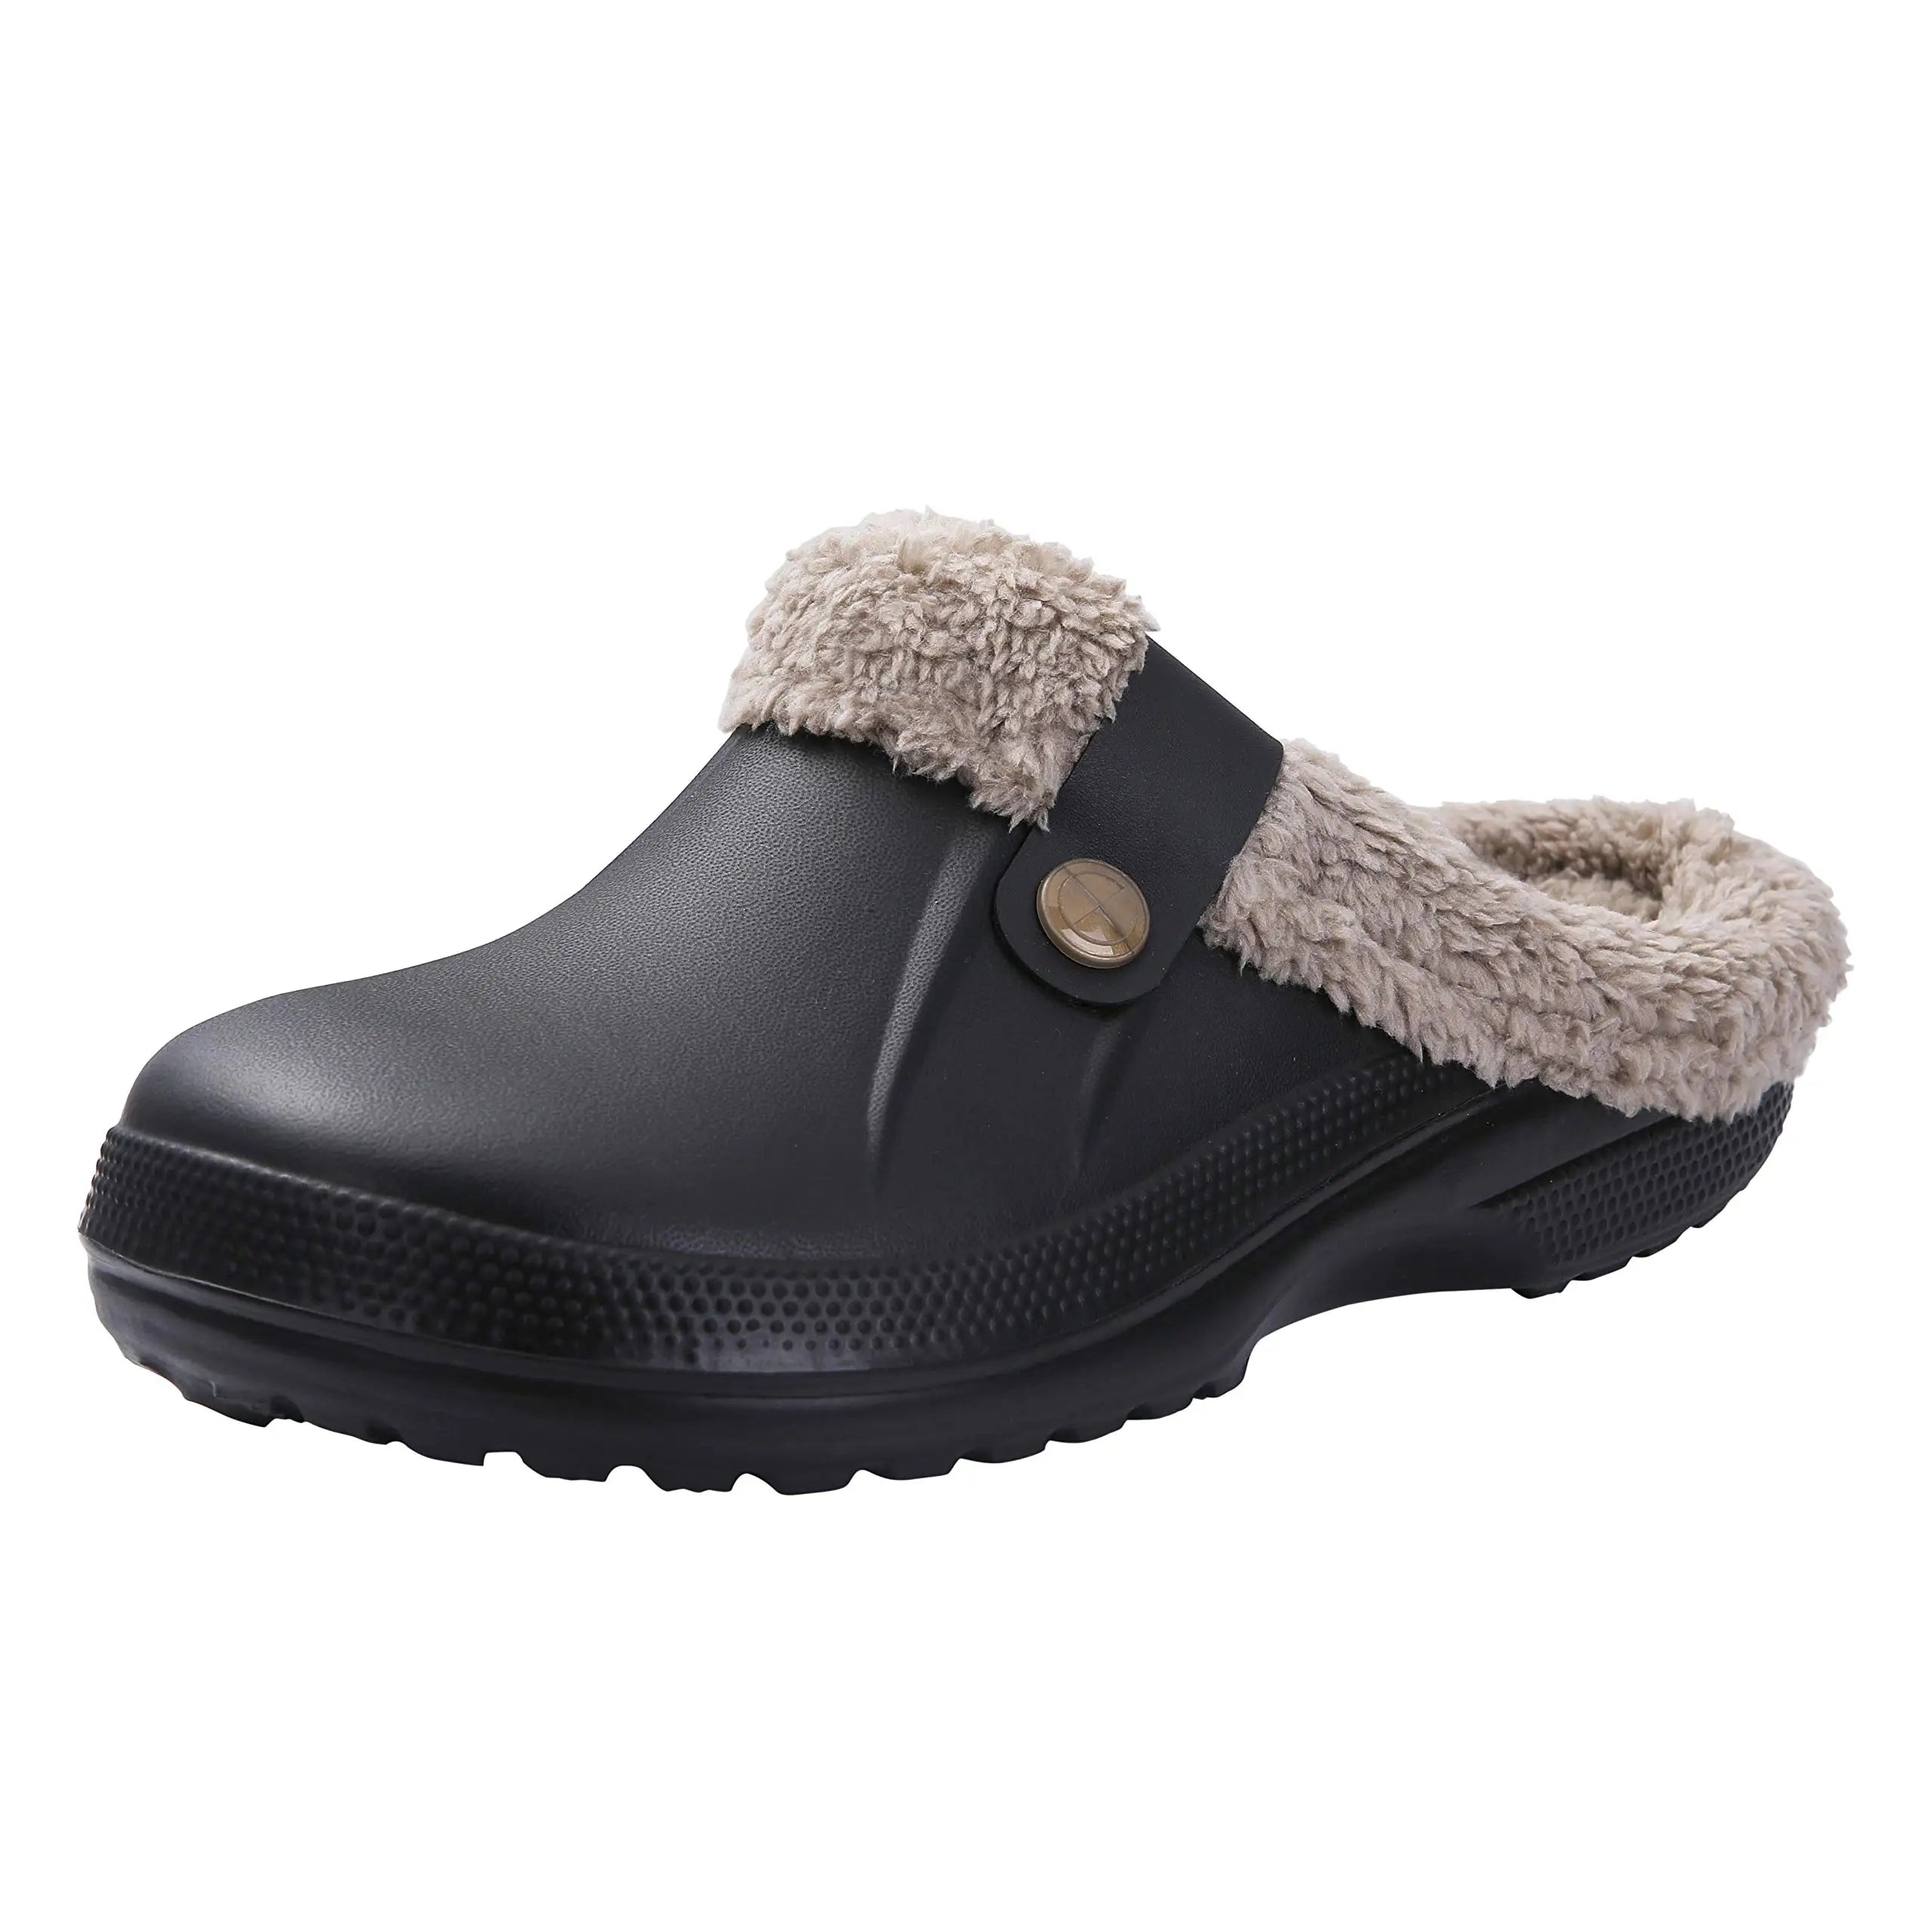 Plush Fur Clogs Slippers For Women Men Winter Soft Furry Slippers Waterproof Garden Shoes Multi-Use Indoor Home Shoes-Dollar Bargains Online Shopping Australia